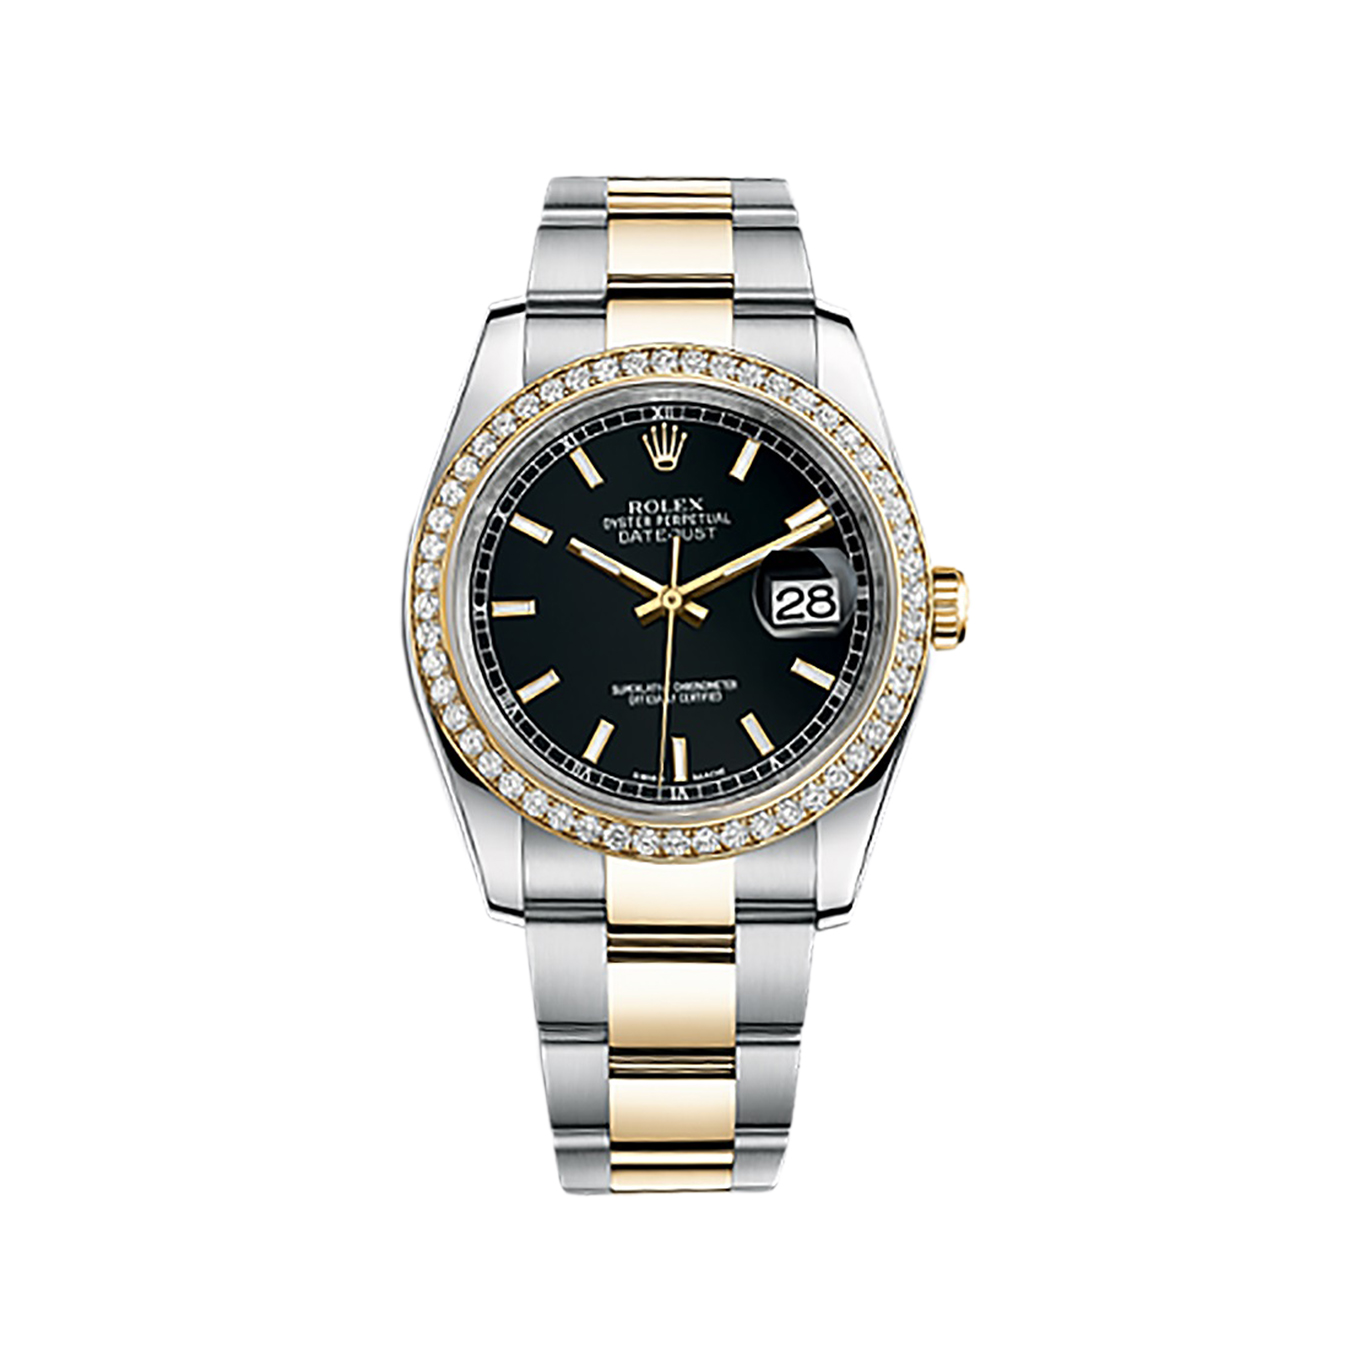 Datejust 36 116243 Gold & Stainless Steel Watch (Black) - Click Image to Close